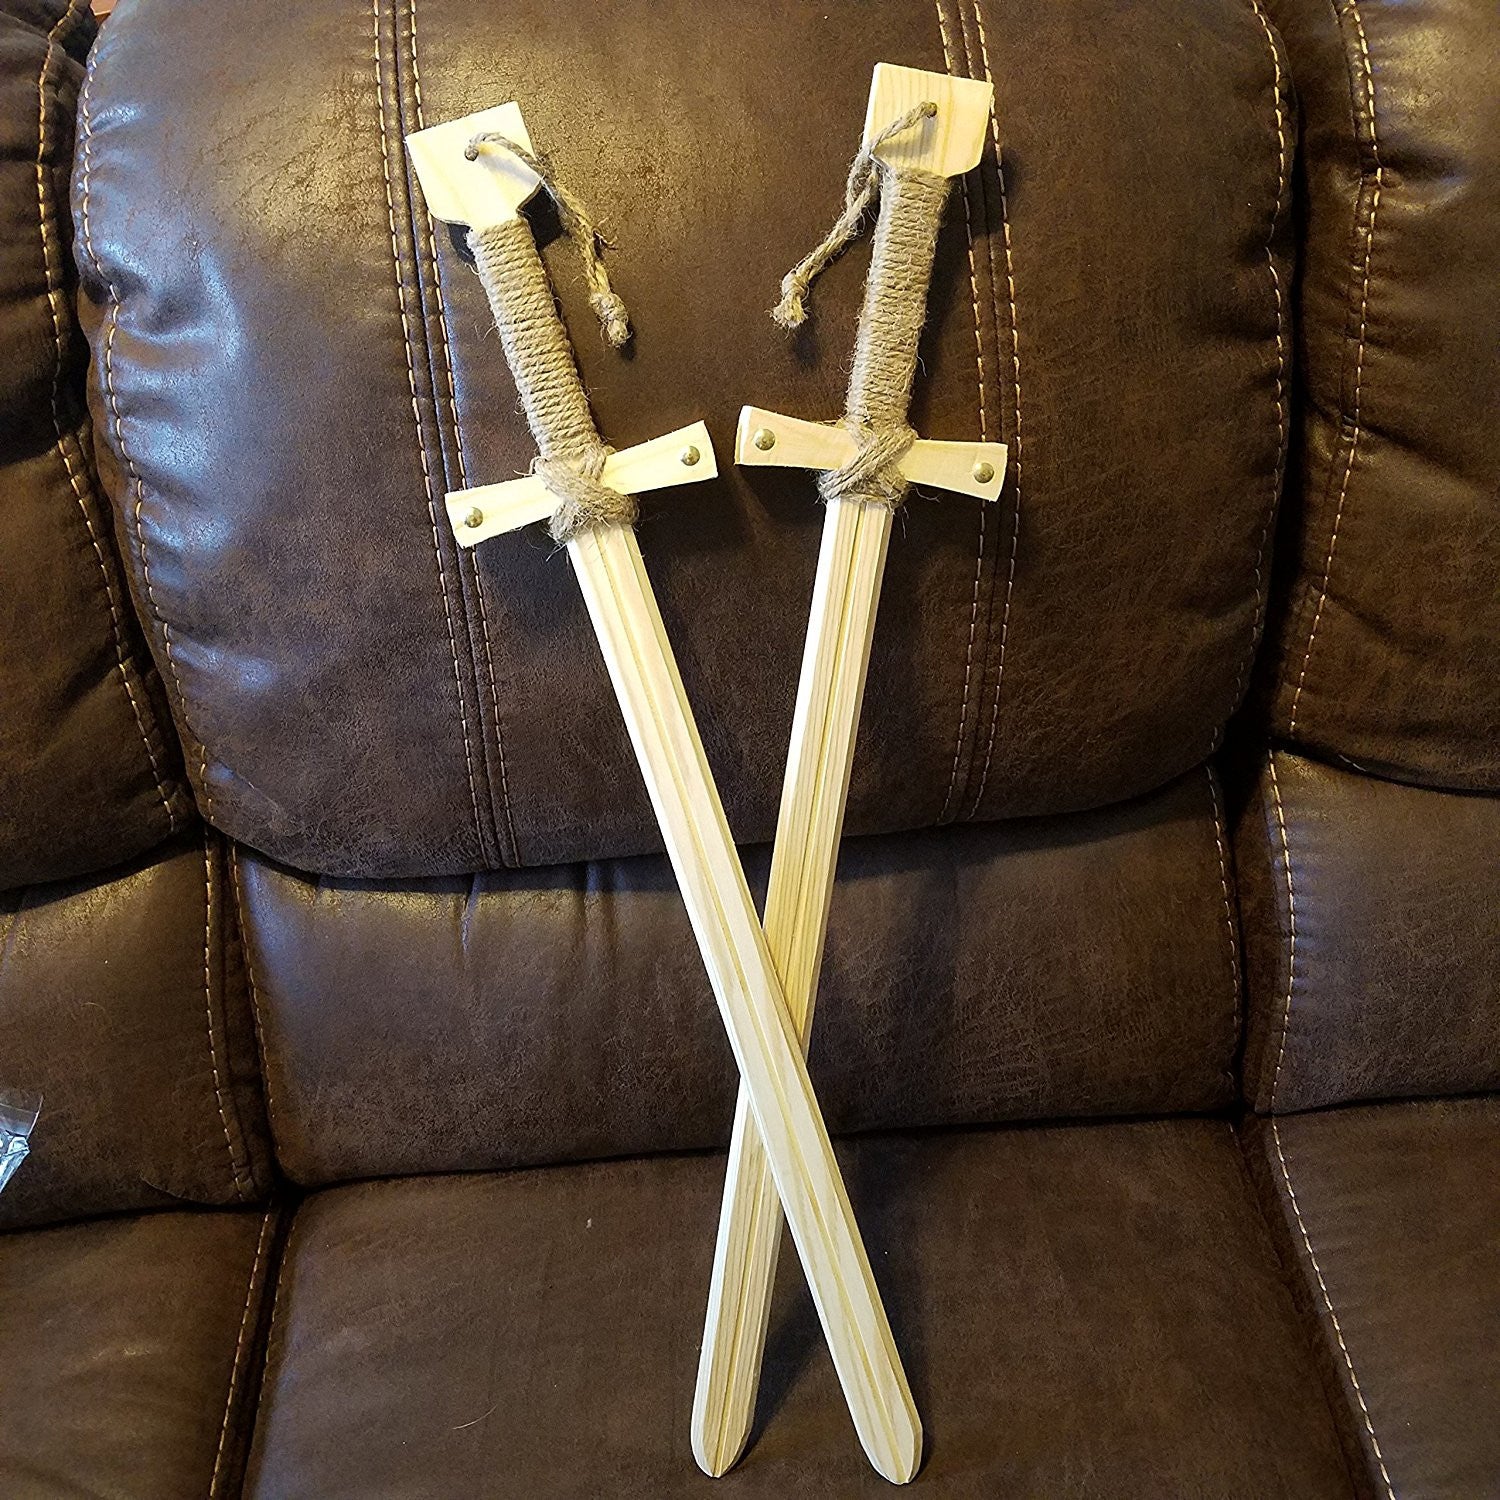 Wooden Knight Toy Swords